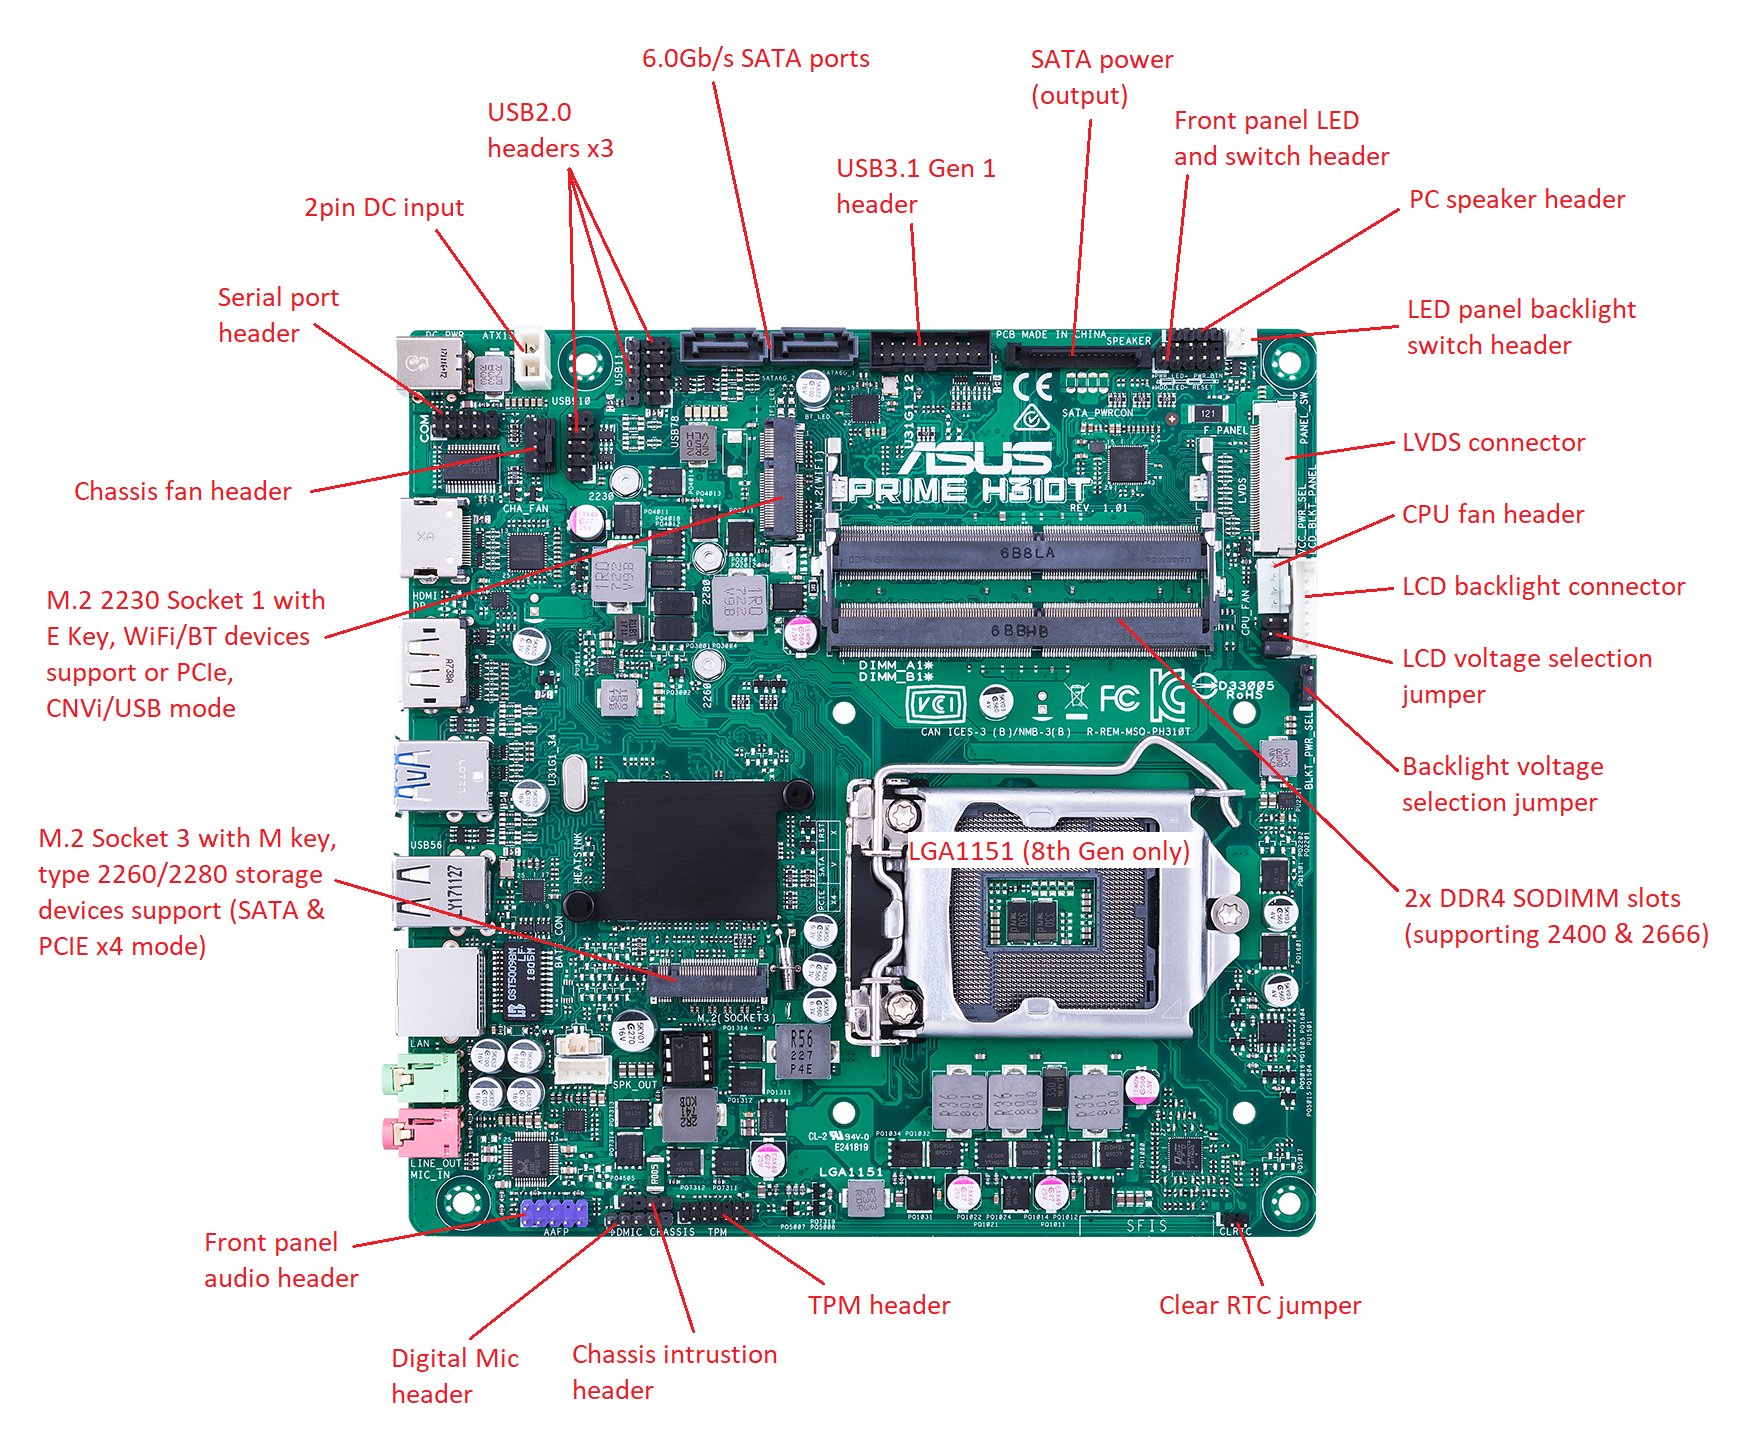 BOAMOT-495 - / Asus - Motherboard Specification, Layout and Manual - Stone Computers Knowledgebase